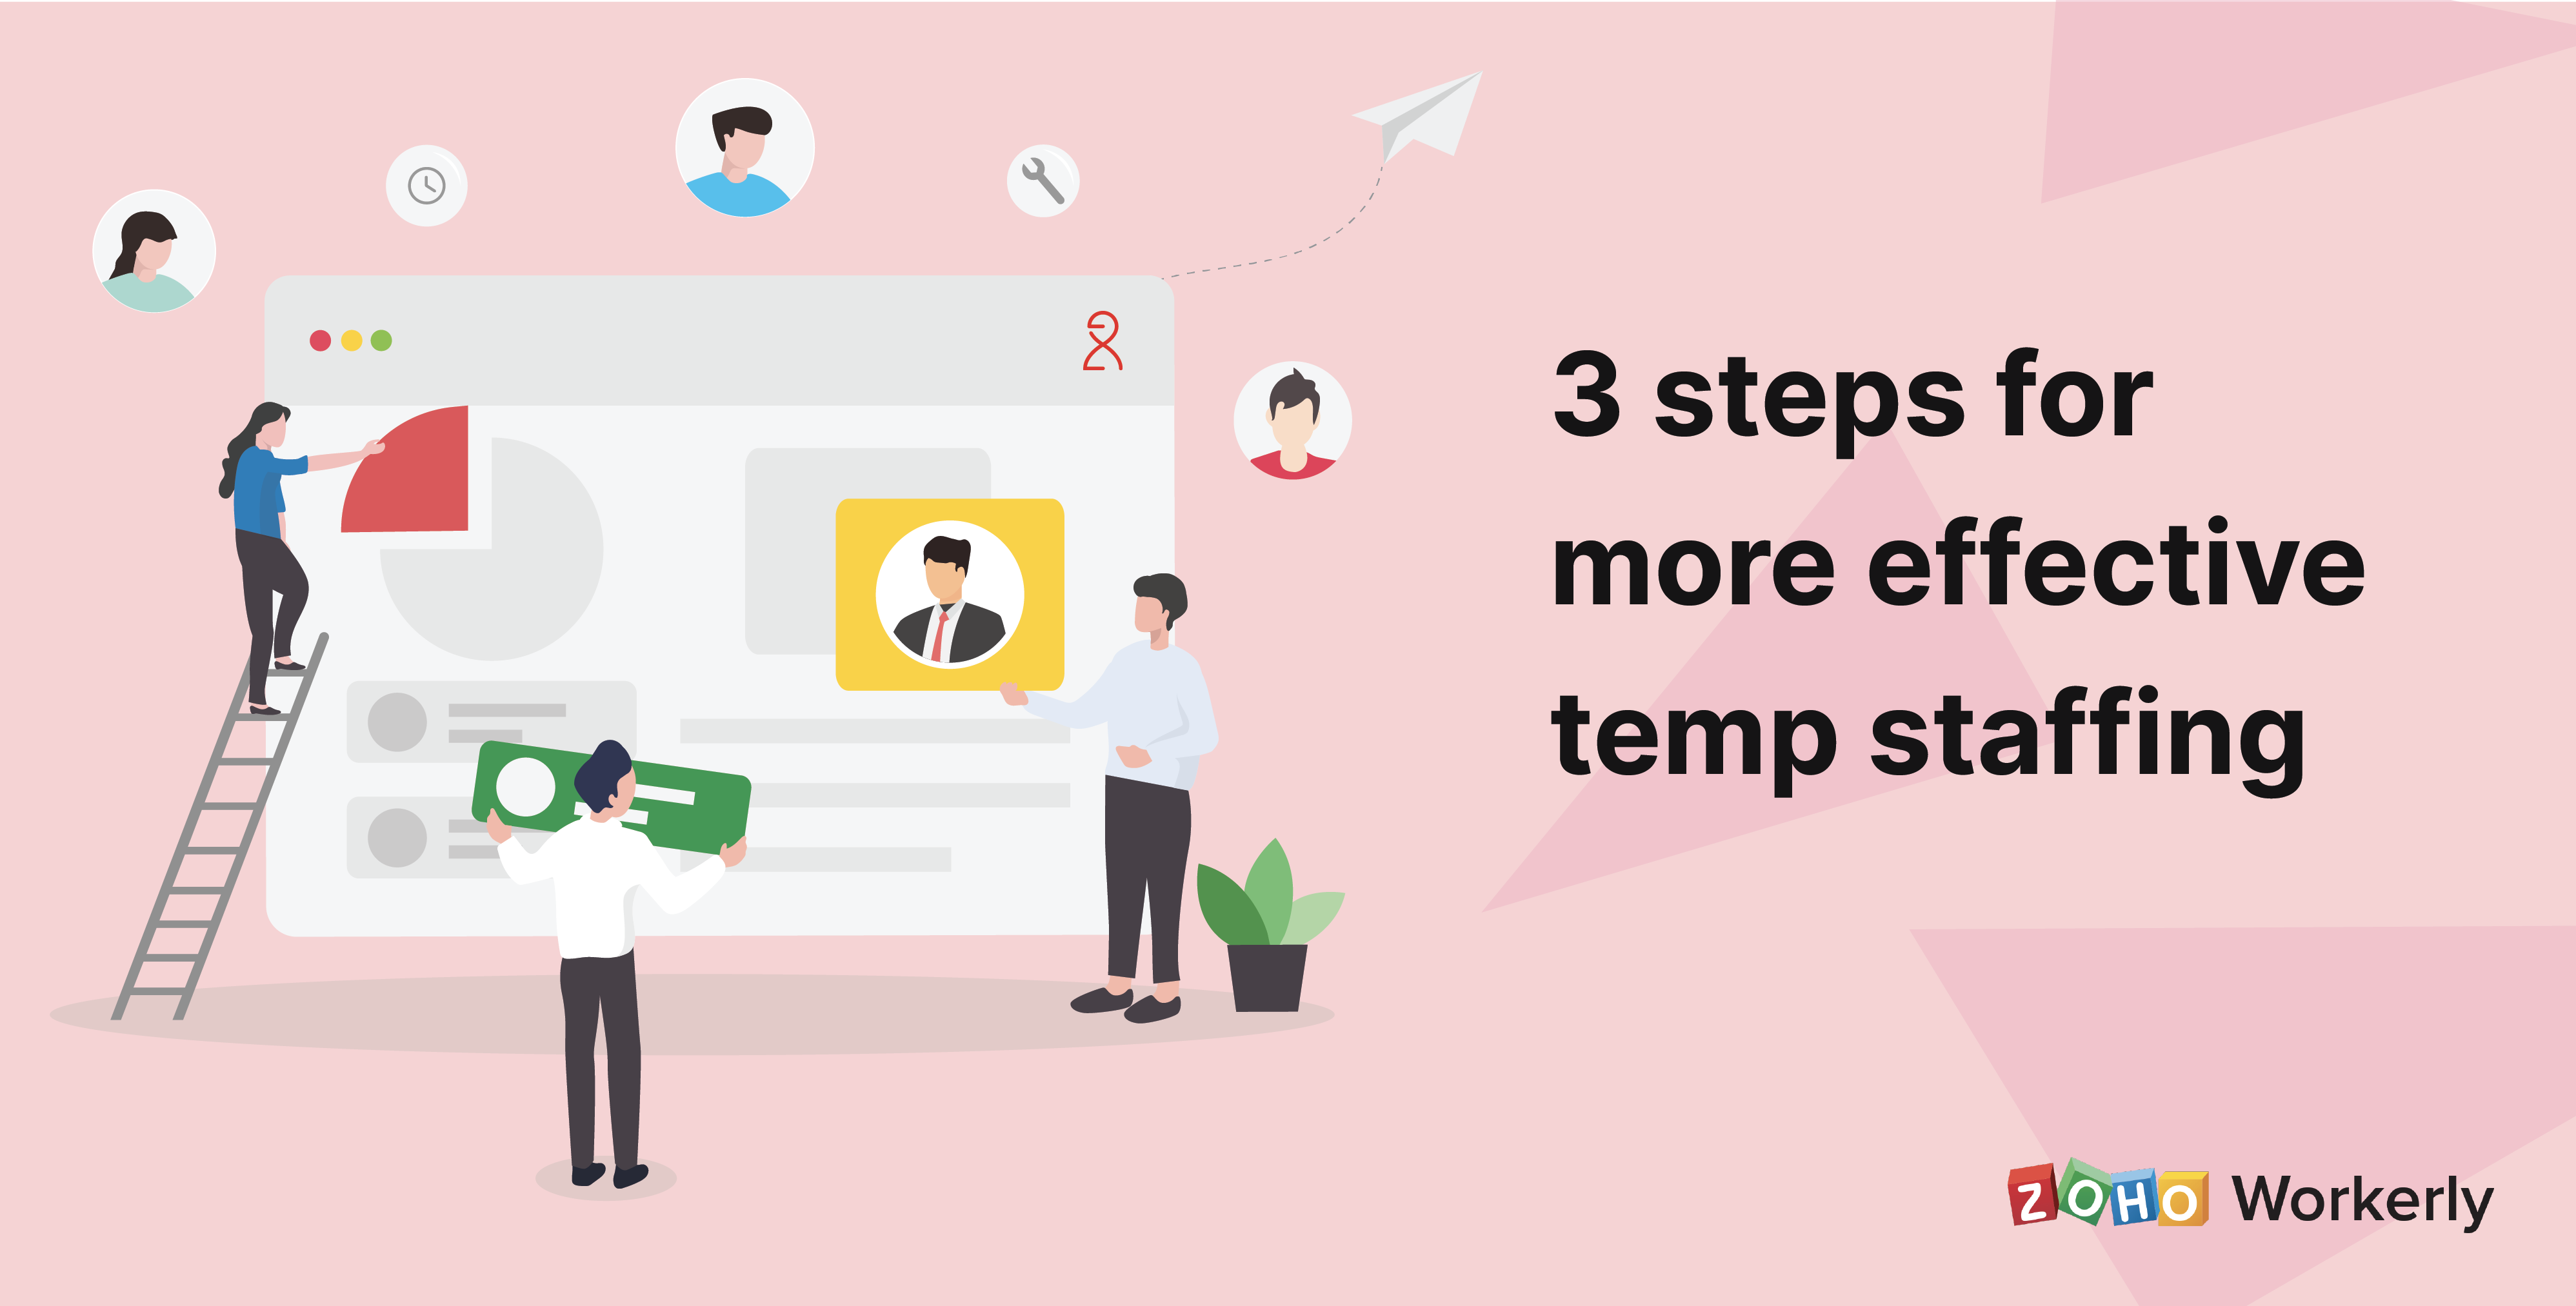 How Zoho Workerly makes managing temps and shift planning easy